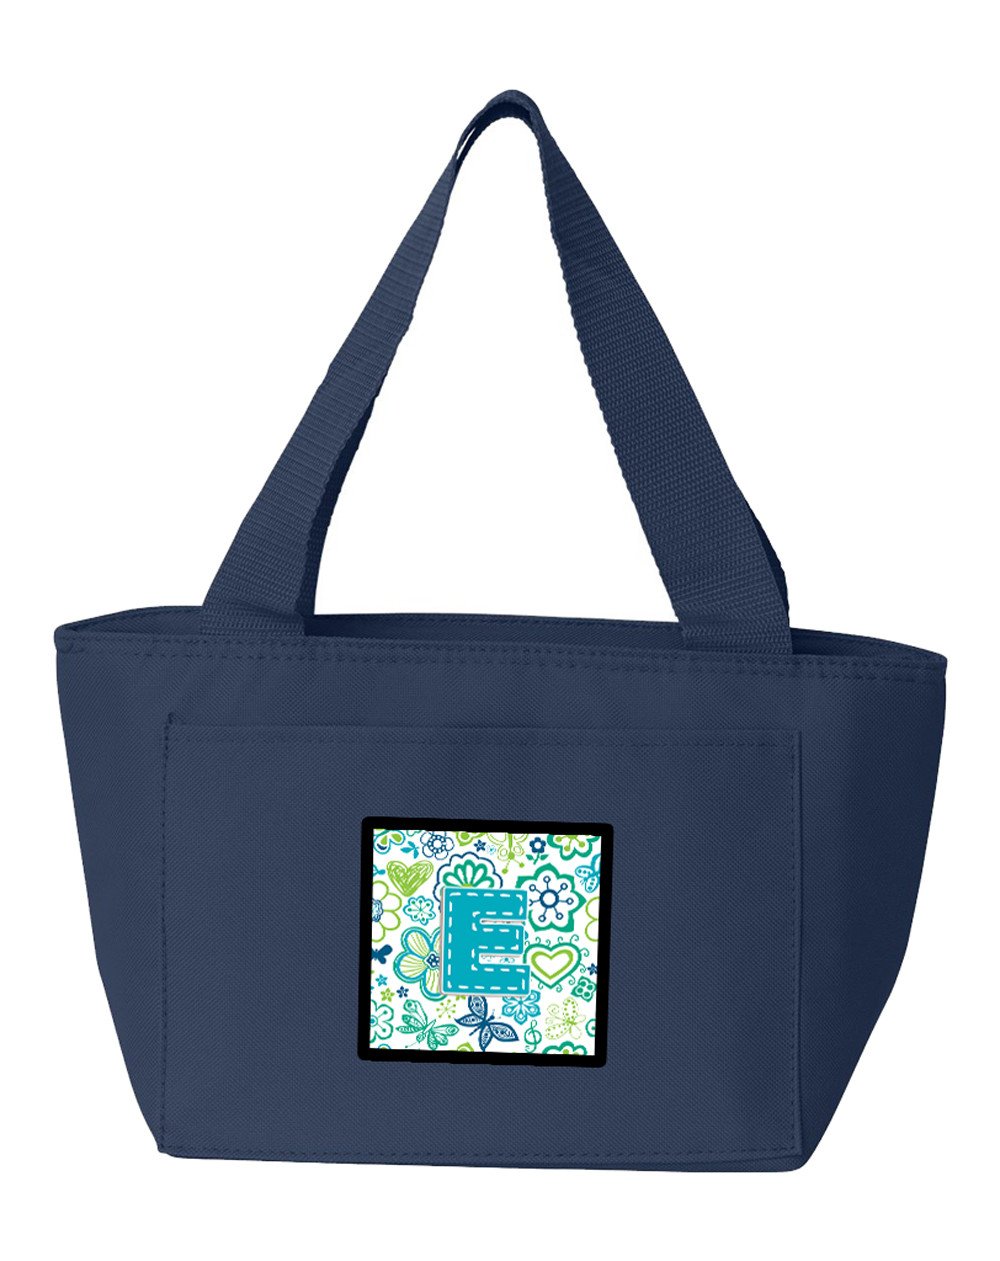 Letter E Flowers and Butterflies Teal Blue Lunch Bag CJ2006-ENA-8808 by Caroline's Treasures